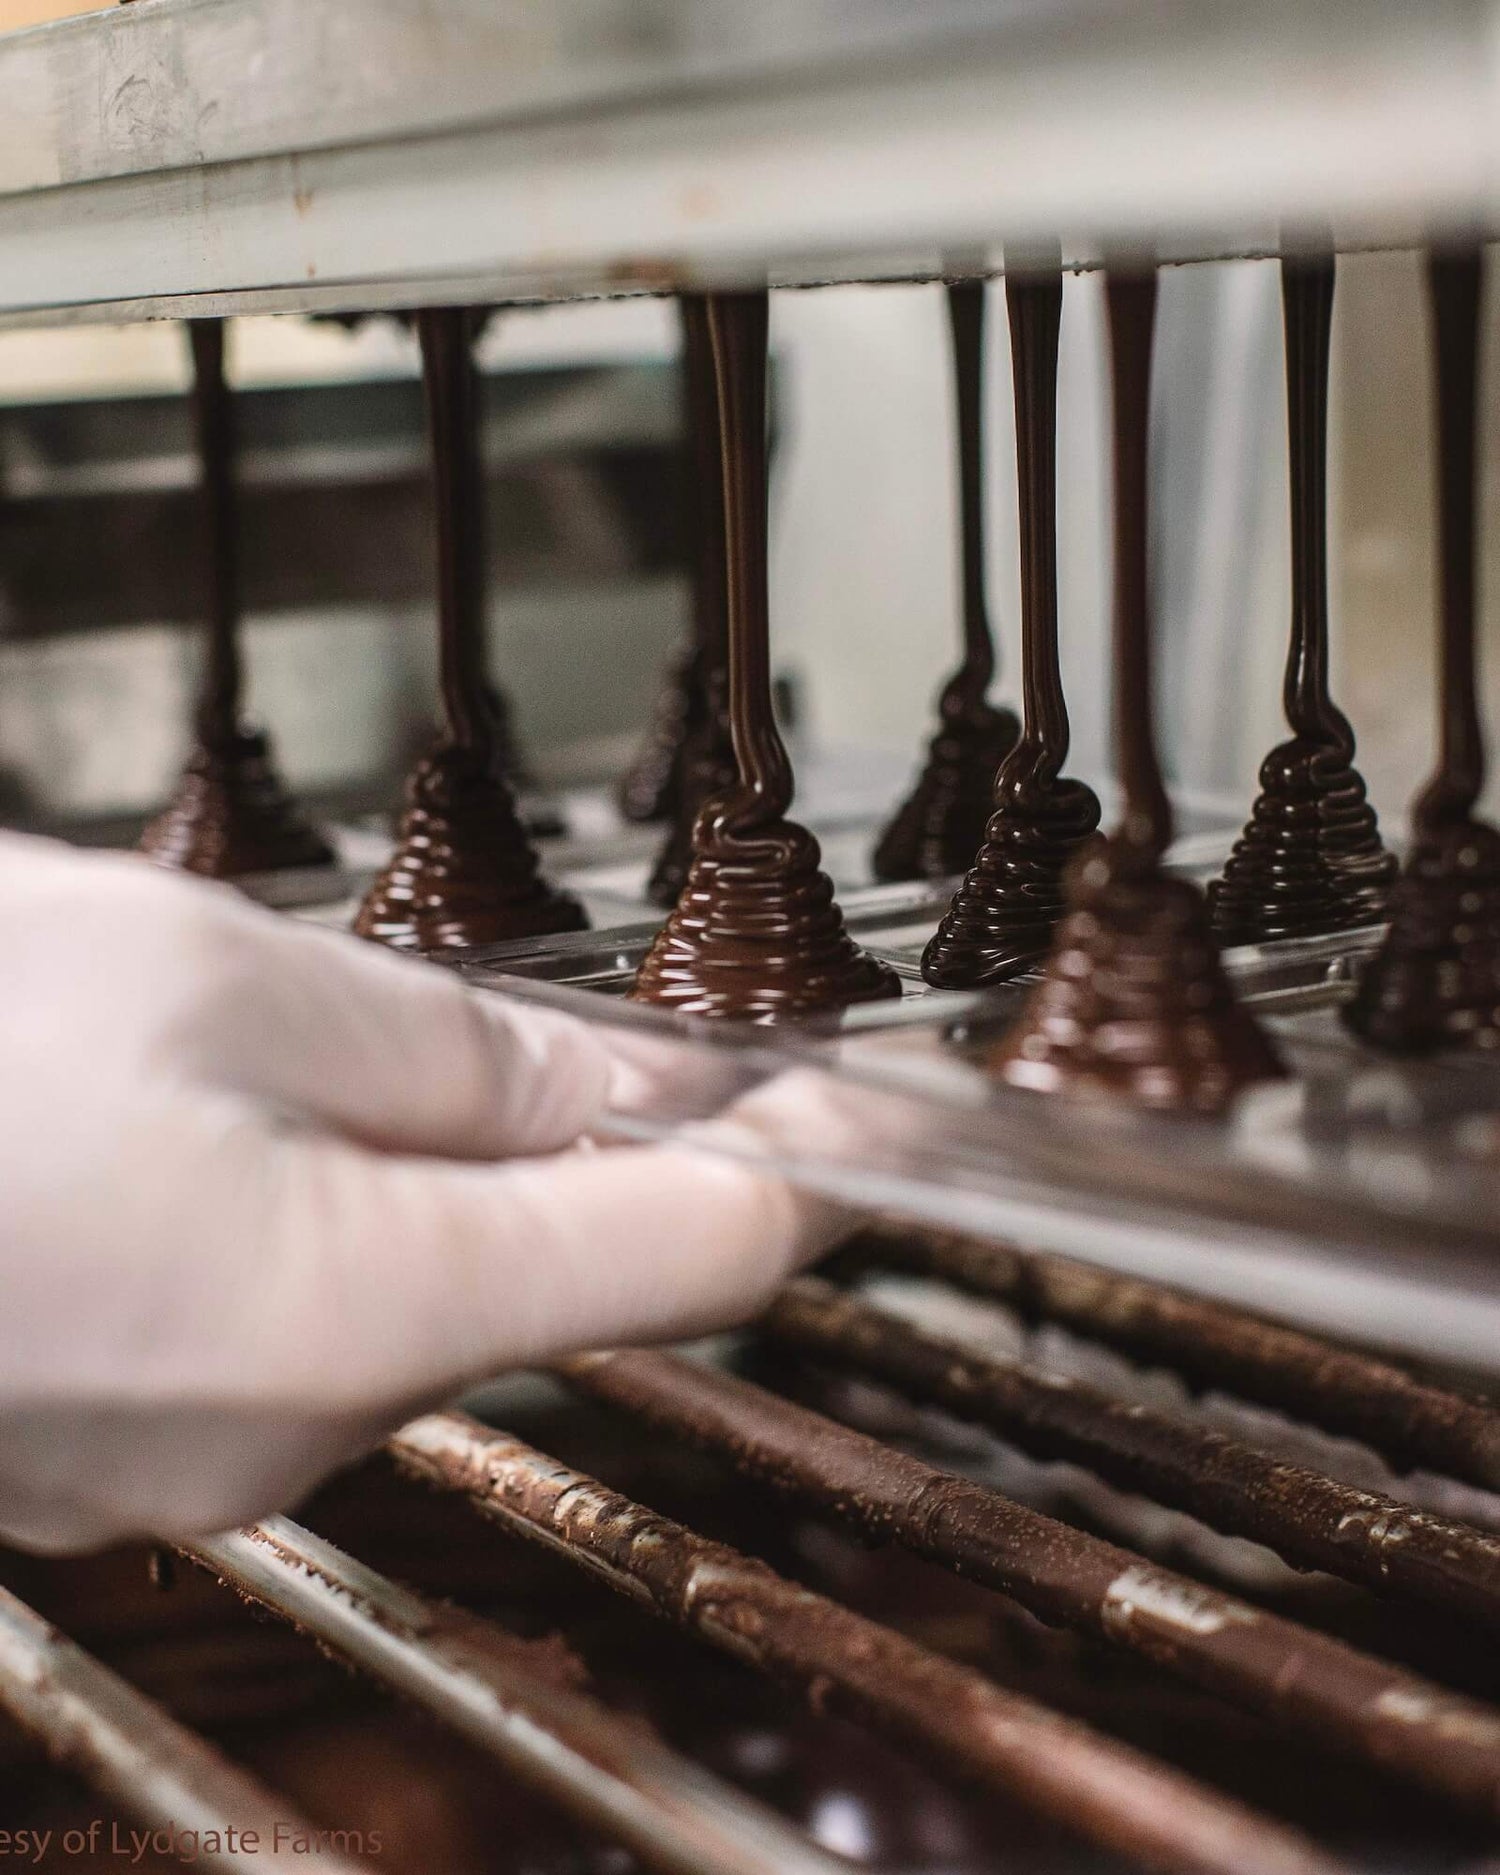 Image of liquid chocolate being dispensed into molds